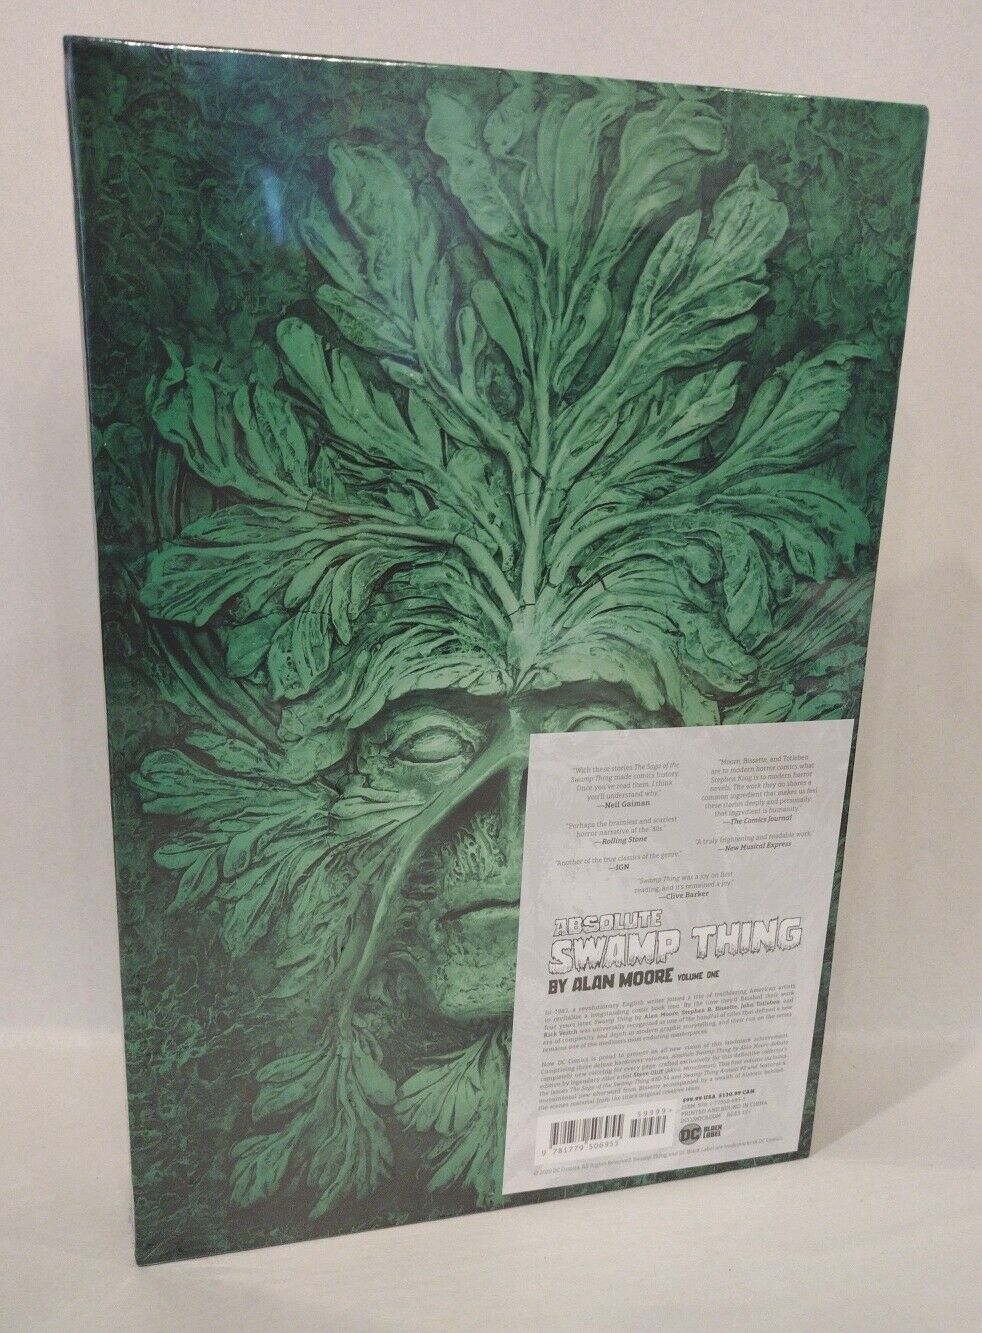 Absolute Swamp Thing by Alan Moore Vol 1 DC Black Label Hardcover New Sealed HC